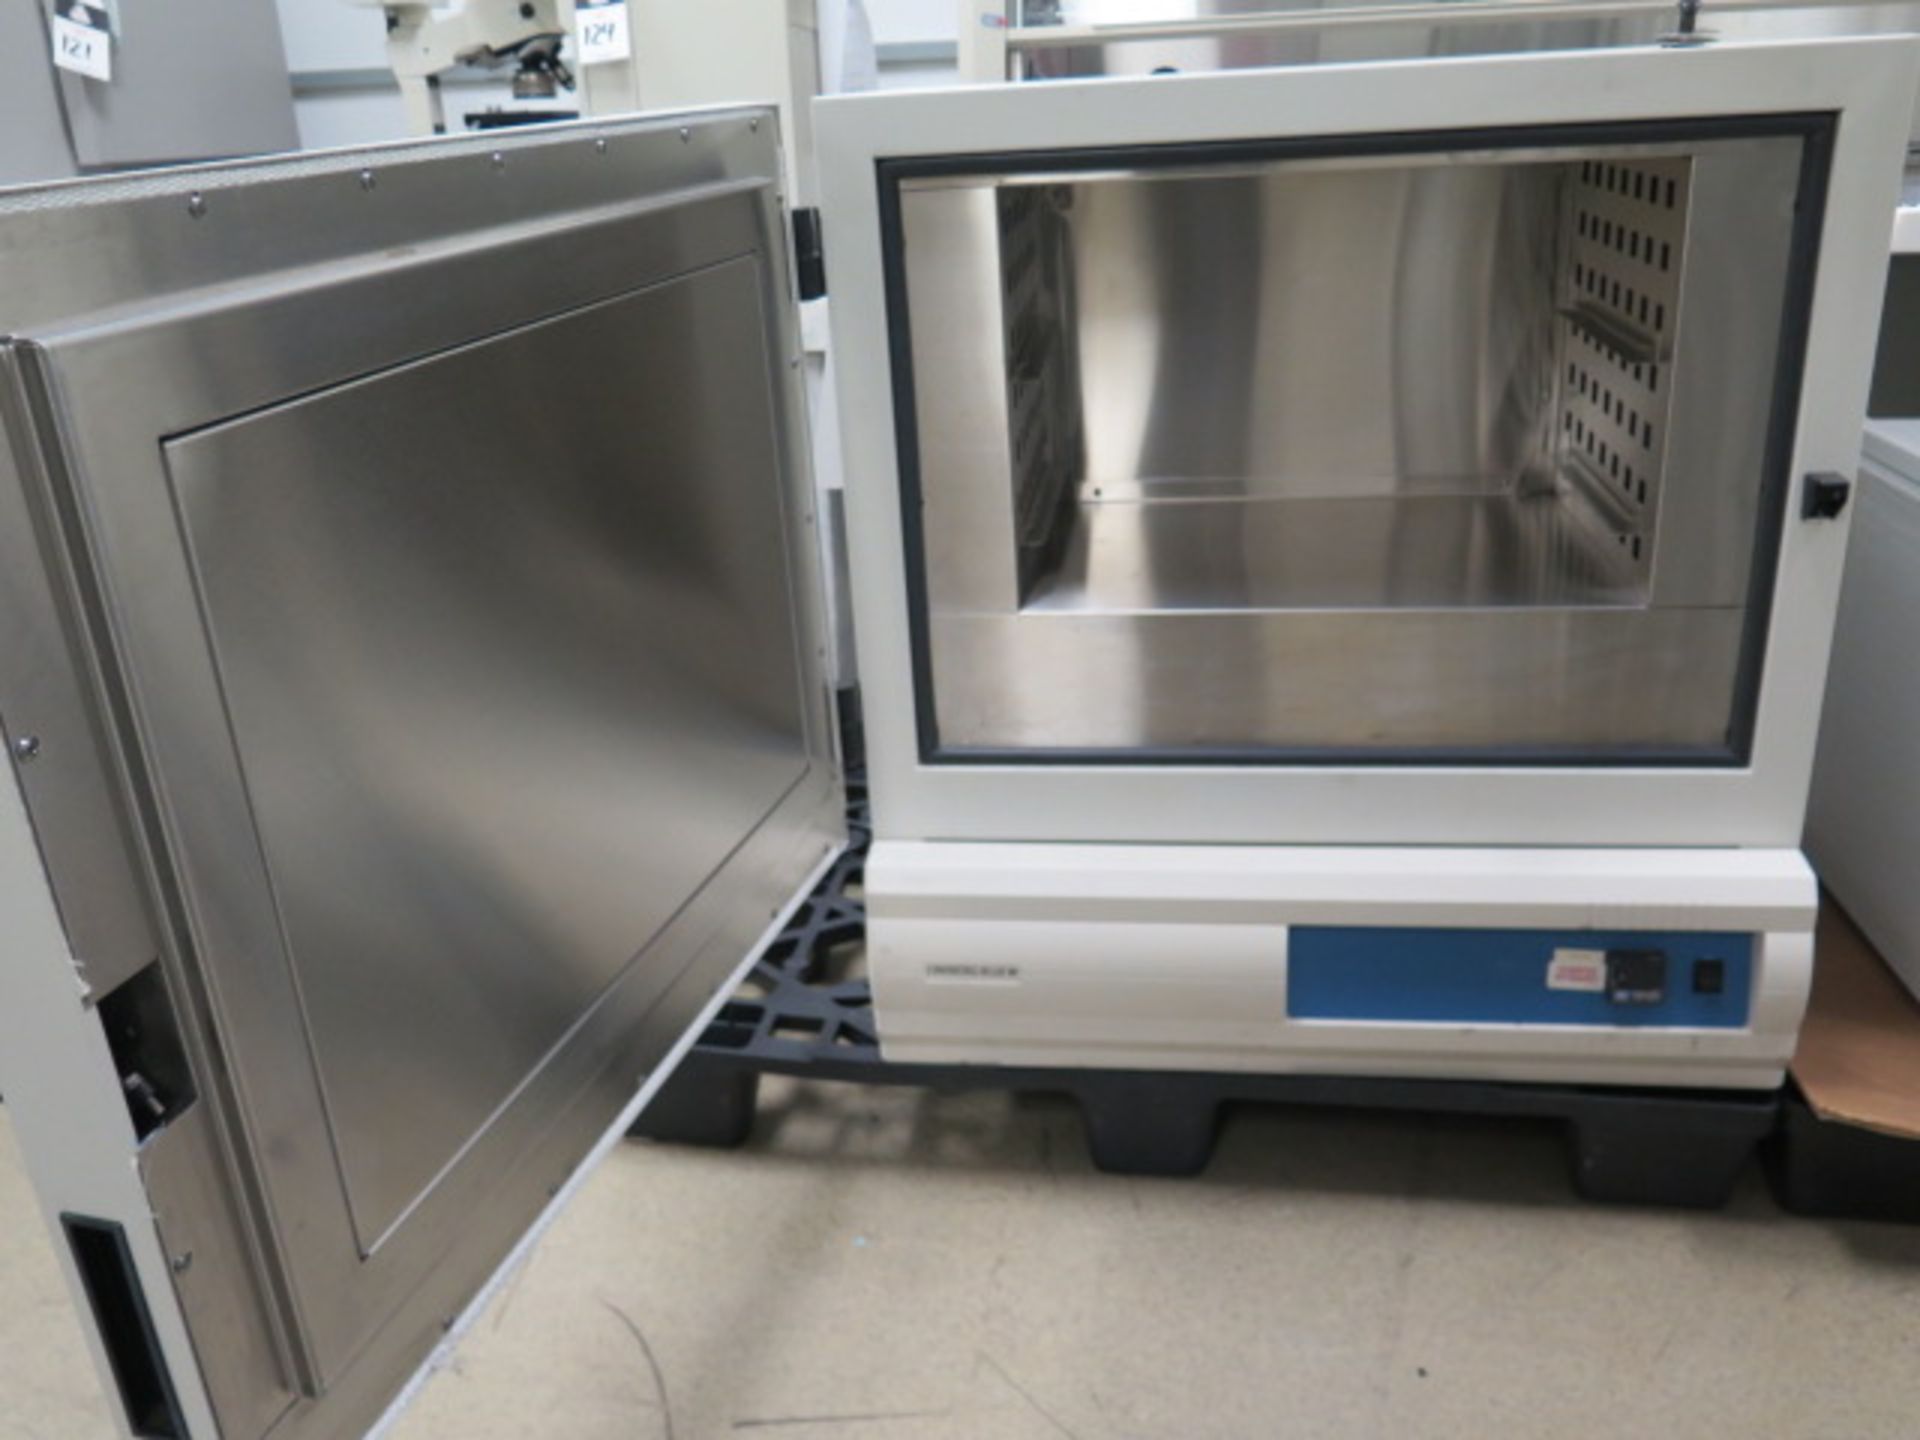 Thermo Electron Lindberg / BlueM mdl. MO1440A-1 Oven s/n Z15R-509008-ZR 300 Degrees C, SOLD AS IS - Image 2 of 8